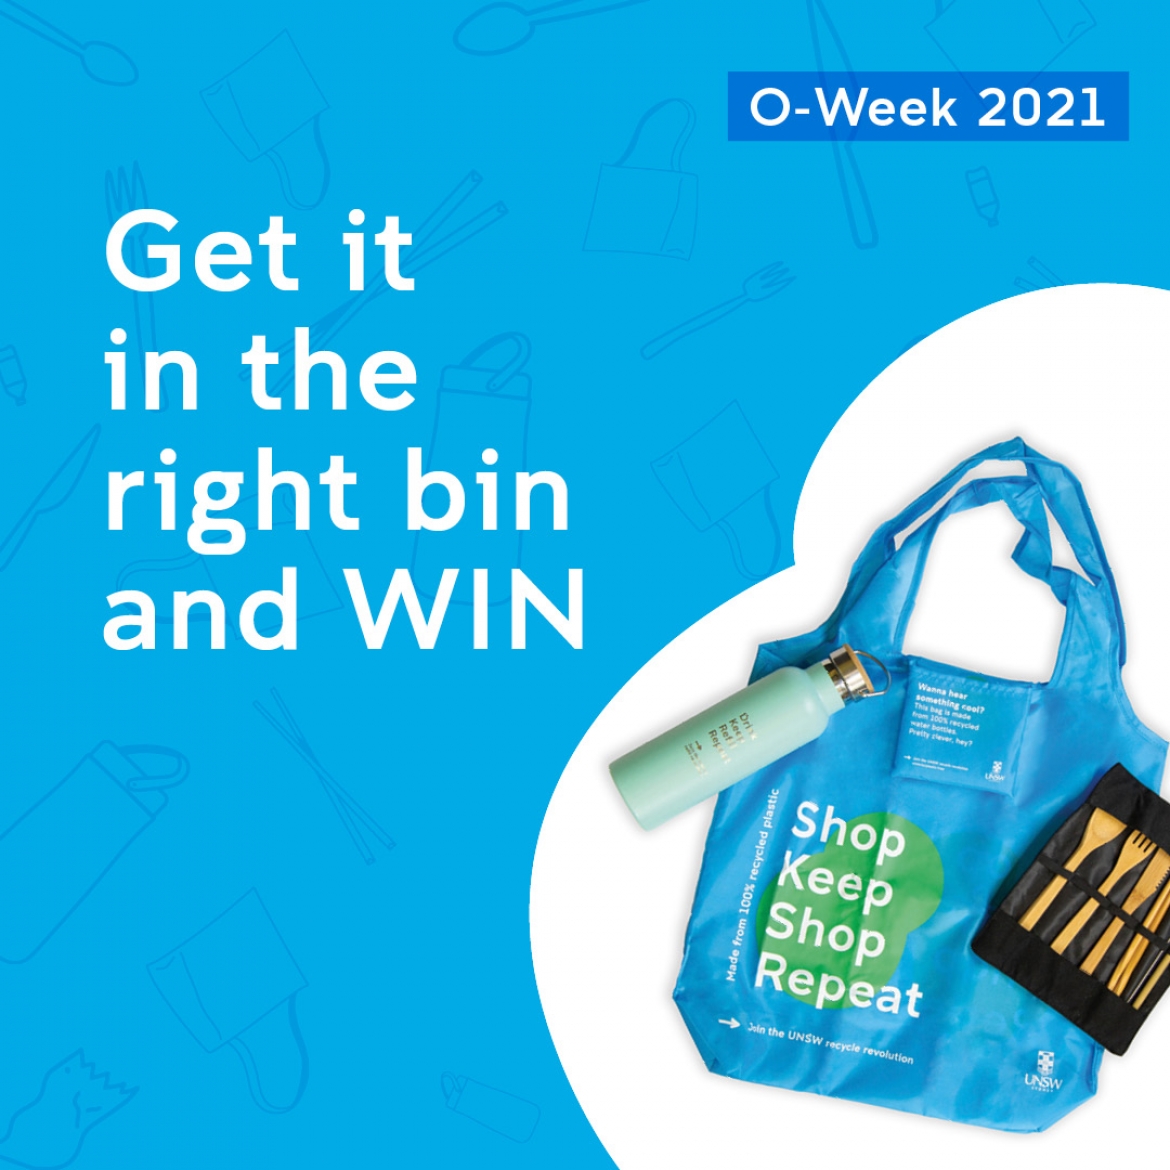 White text on blue background "Get it in the right bin and win"